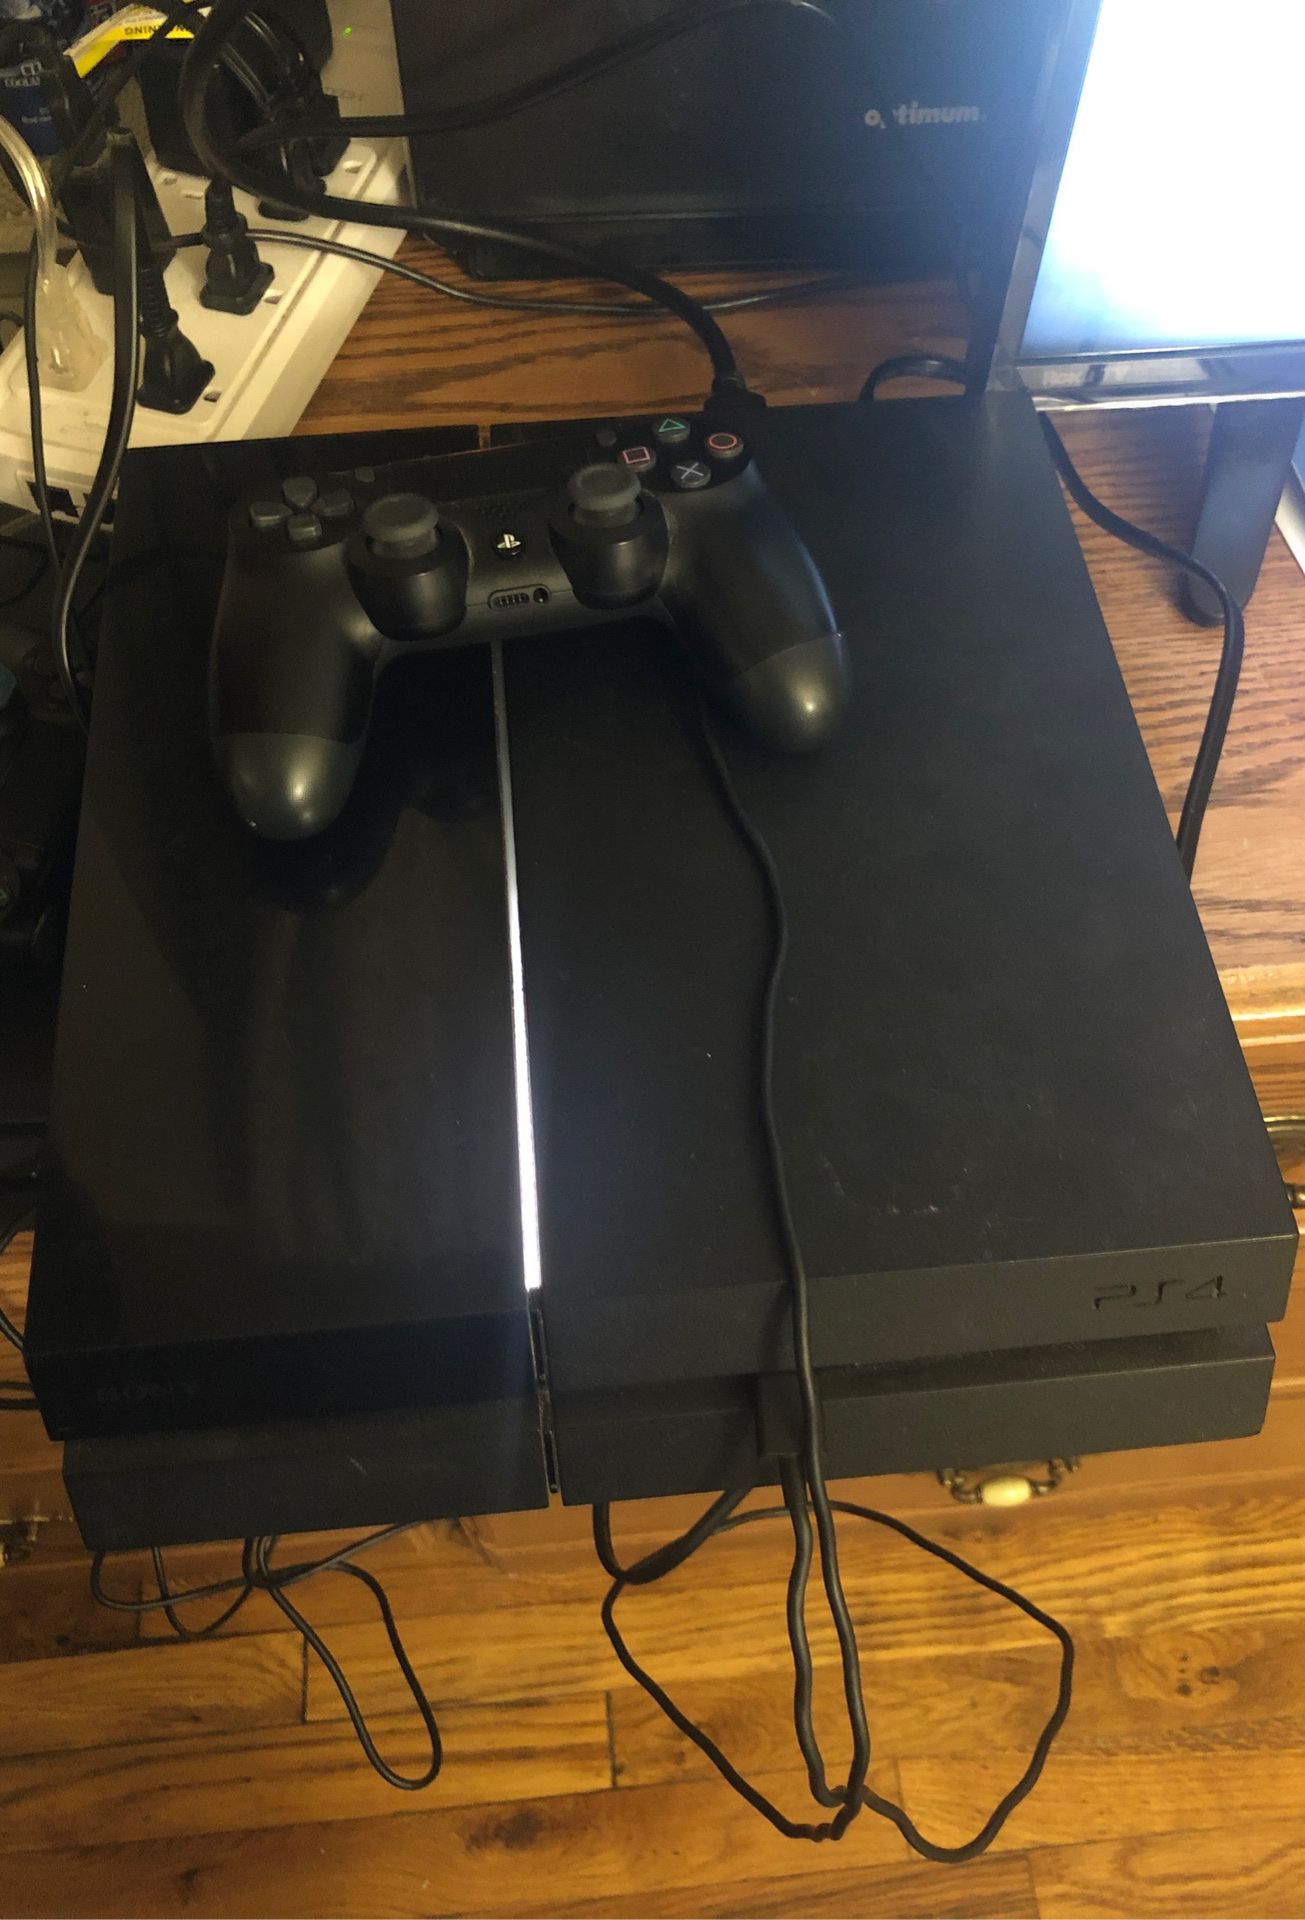 Ps4 System 500 gb with controller good condition $150